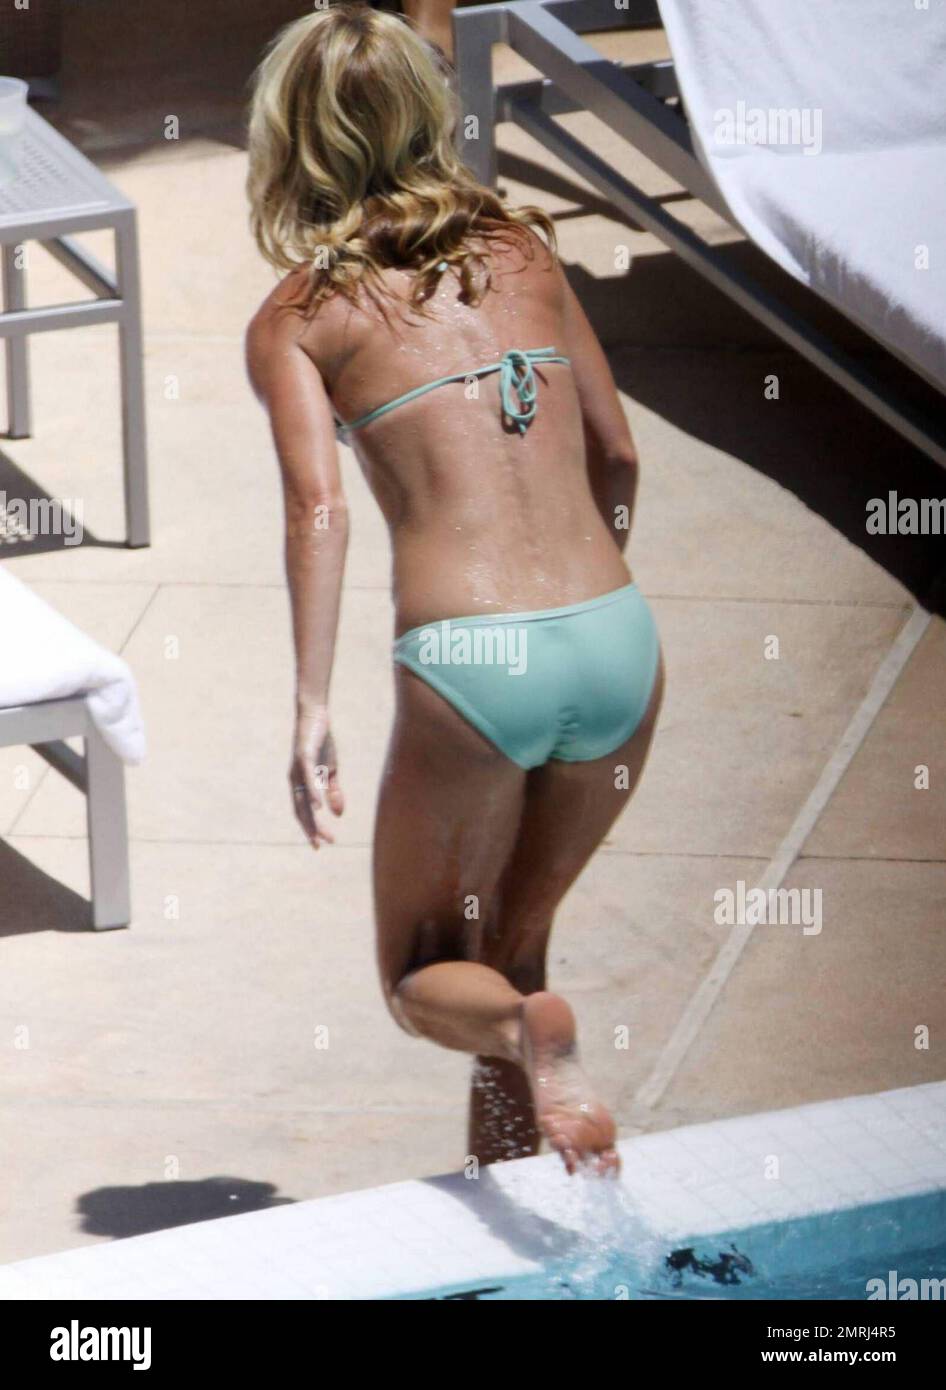 Exclusive!! Kelly Ripa takes a refreshing dip in the pool after filming Live With Regis And Kelly at the Fontainbleu Miami Beach, FL, 05/05/09 Stock Photo photo